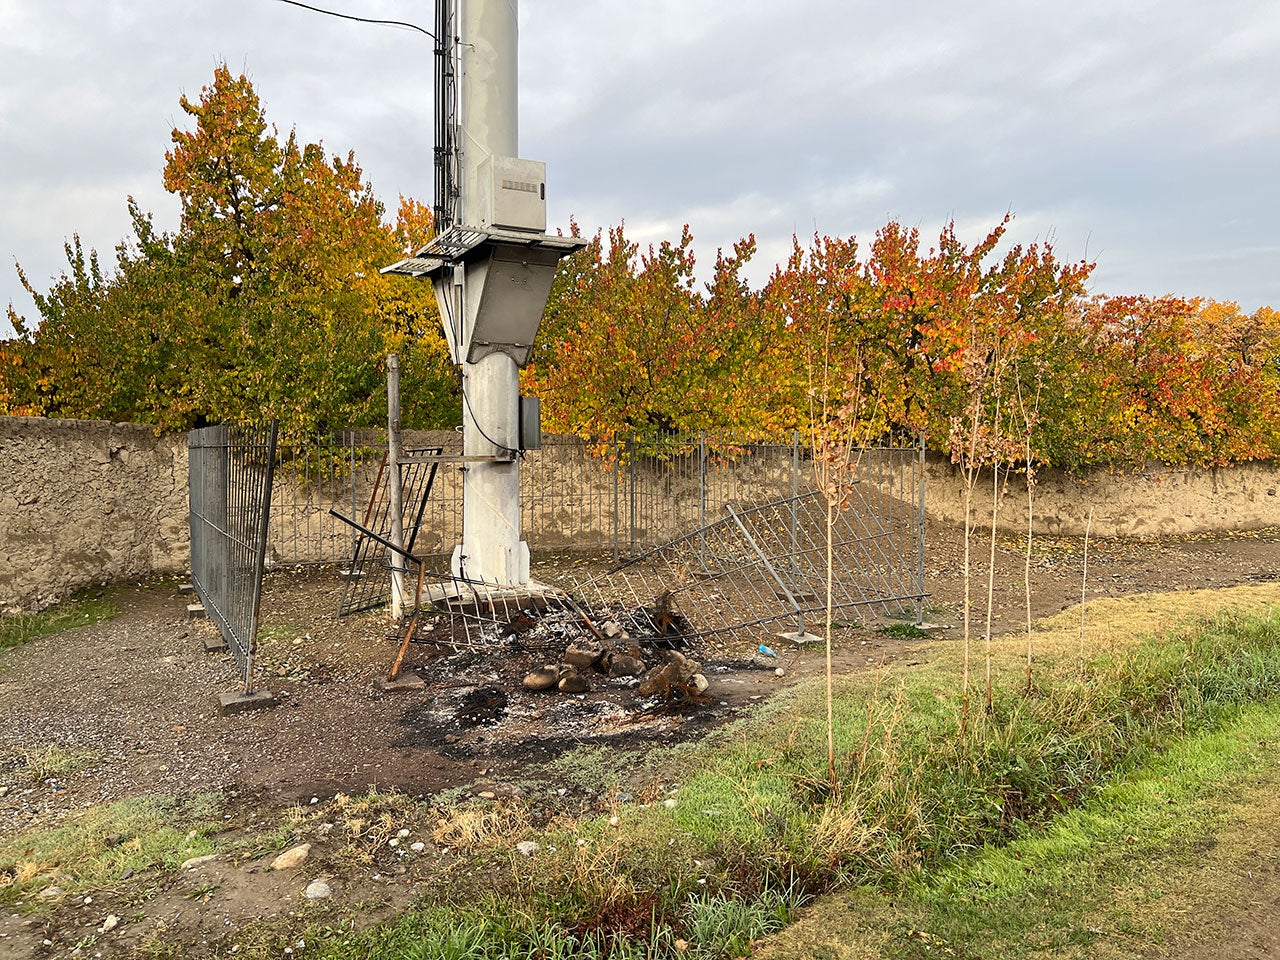 Fire damage around a mobile phone tower in the Kyrgyz village of Dostuk (Batken district). The village was completely destroyed by fire whilebriefly under the control of Tajik forces on September 16, 2022.